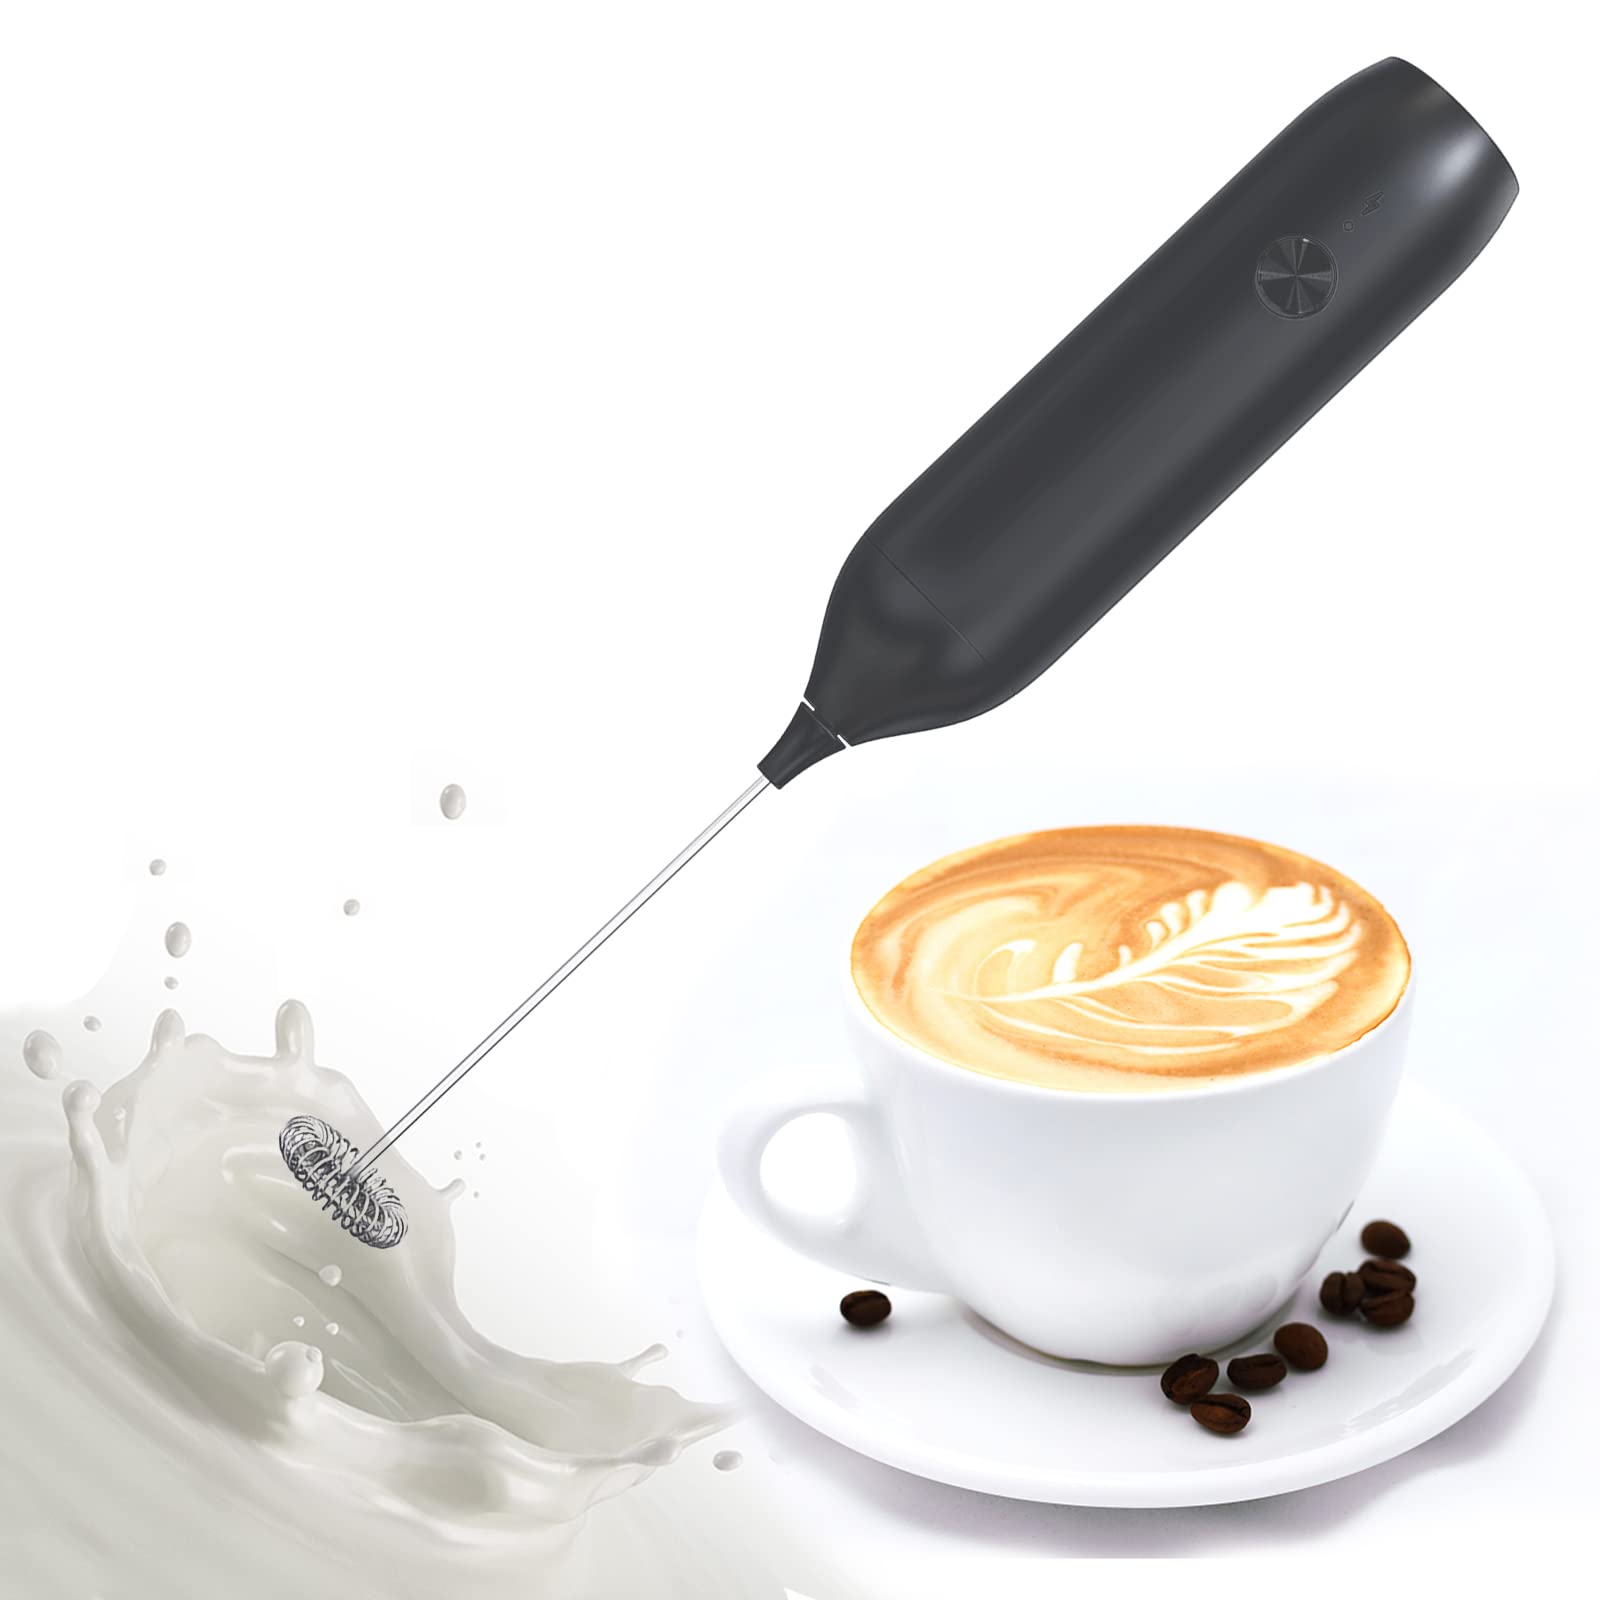 Influtto Electric Handheld USB Rechargeable Milk Frother, Foam Maker,Mini Mixer and Coffee Blender,Black Color